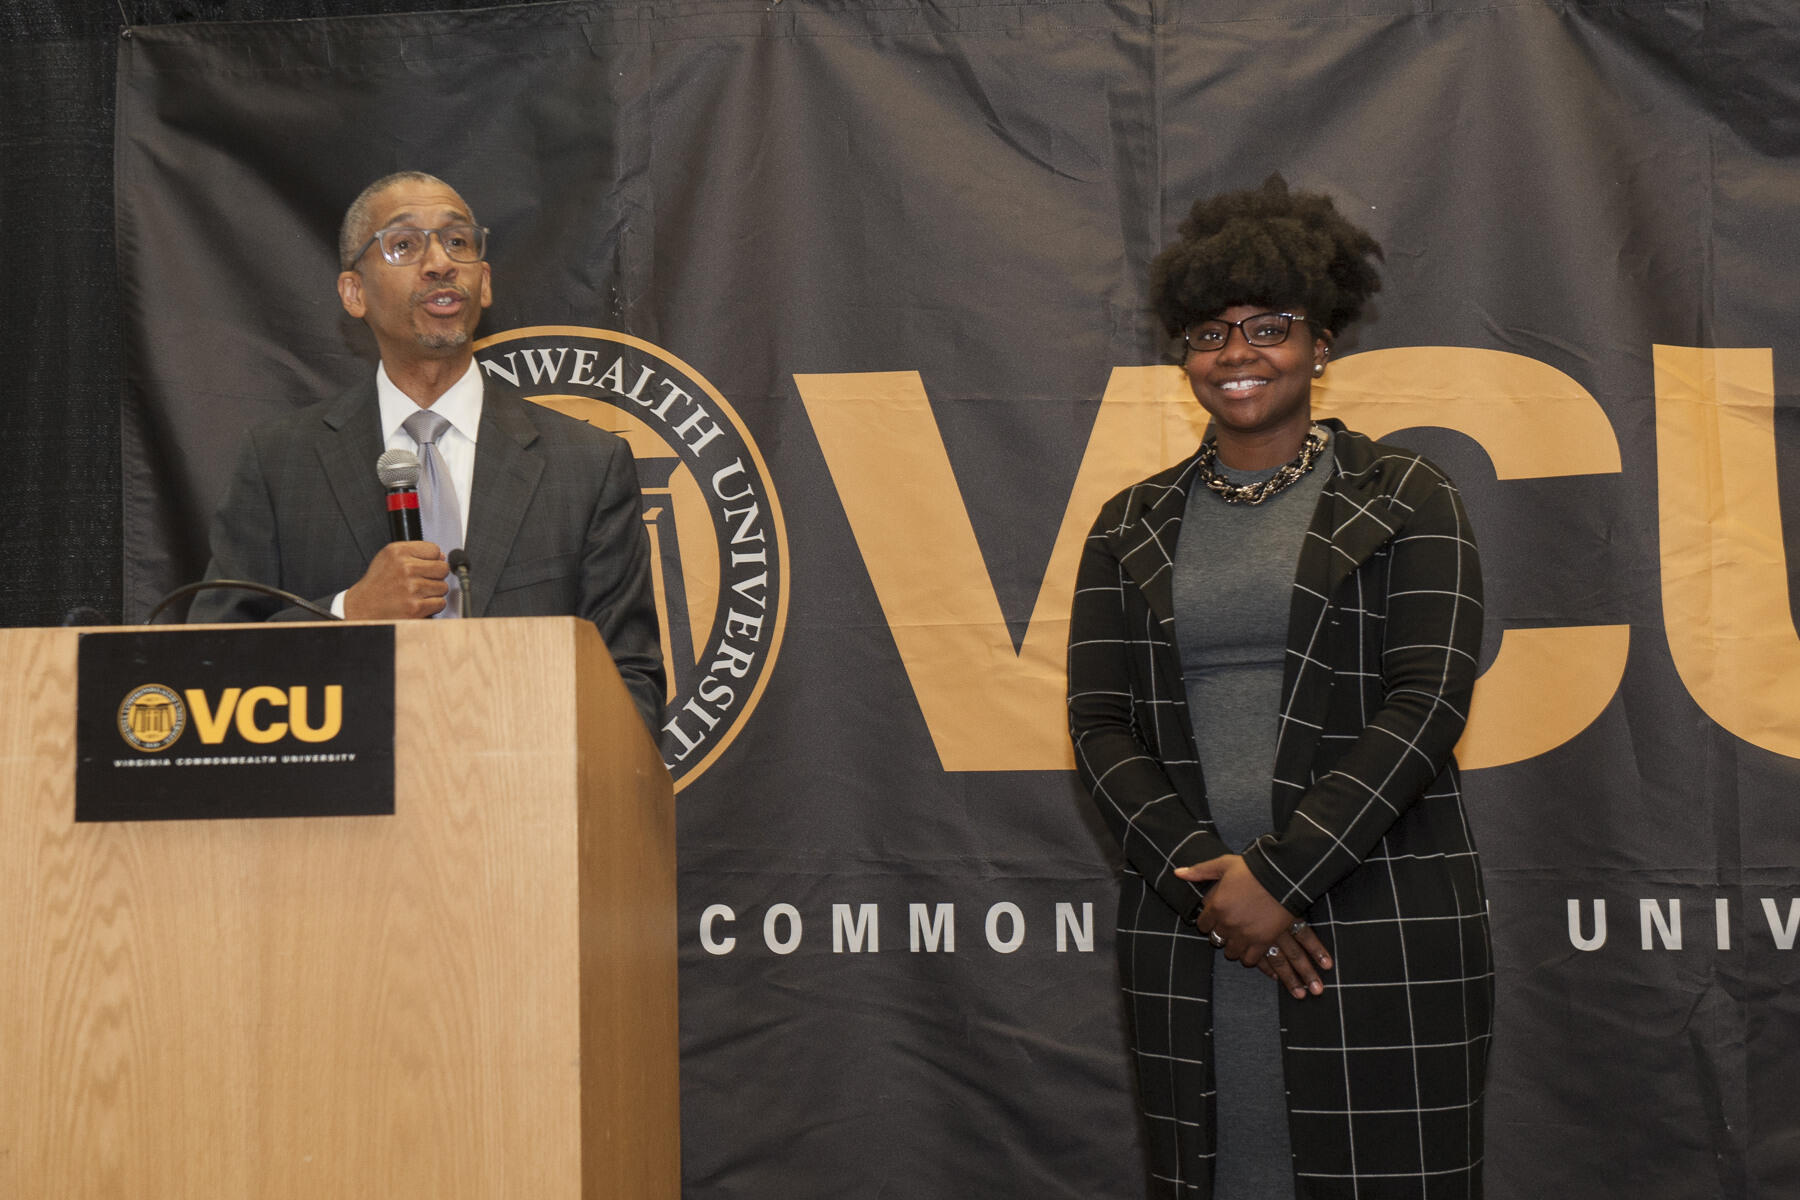 Kevin Allison, Ph.D., senior executive director of strategy and presidential administration at VCU, with Nauje Jones, the first VCU student to receive a Newman Civic Fellowship.